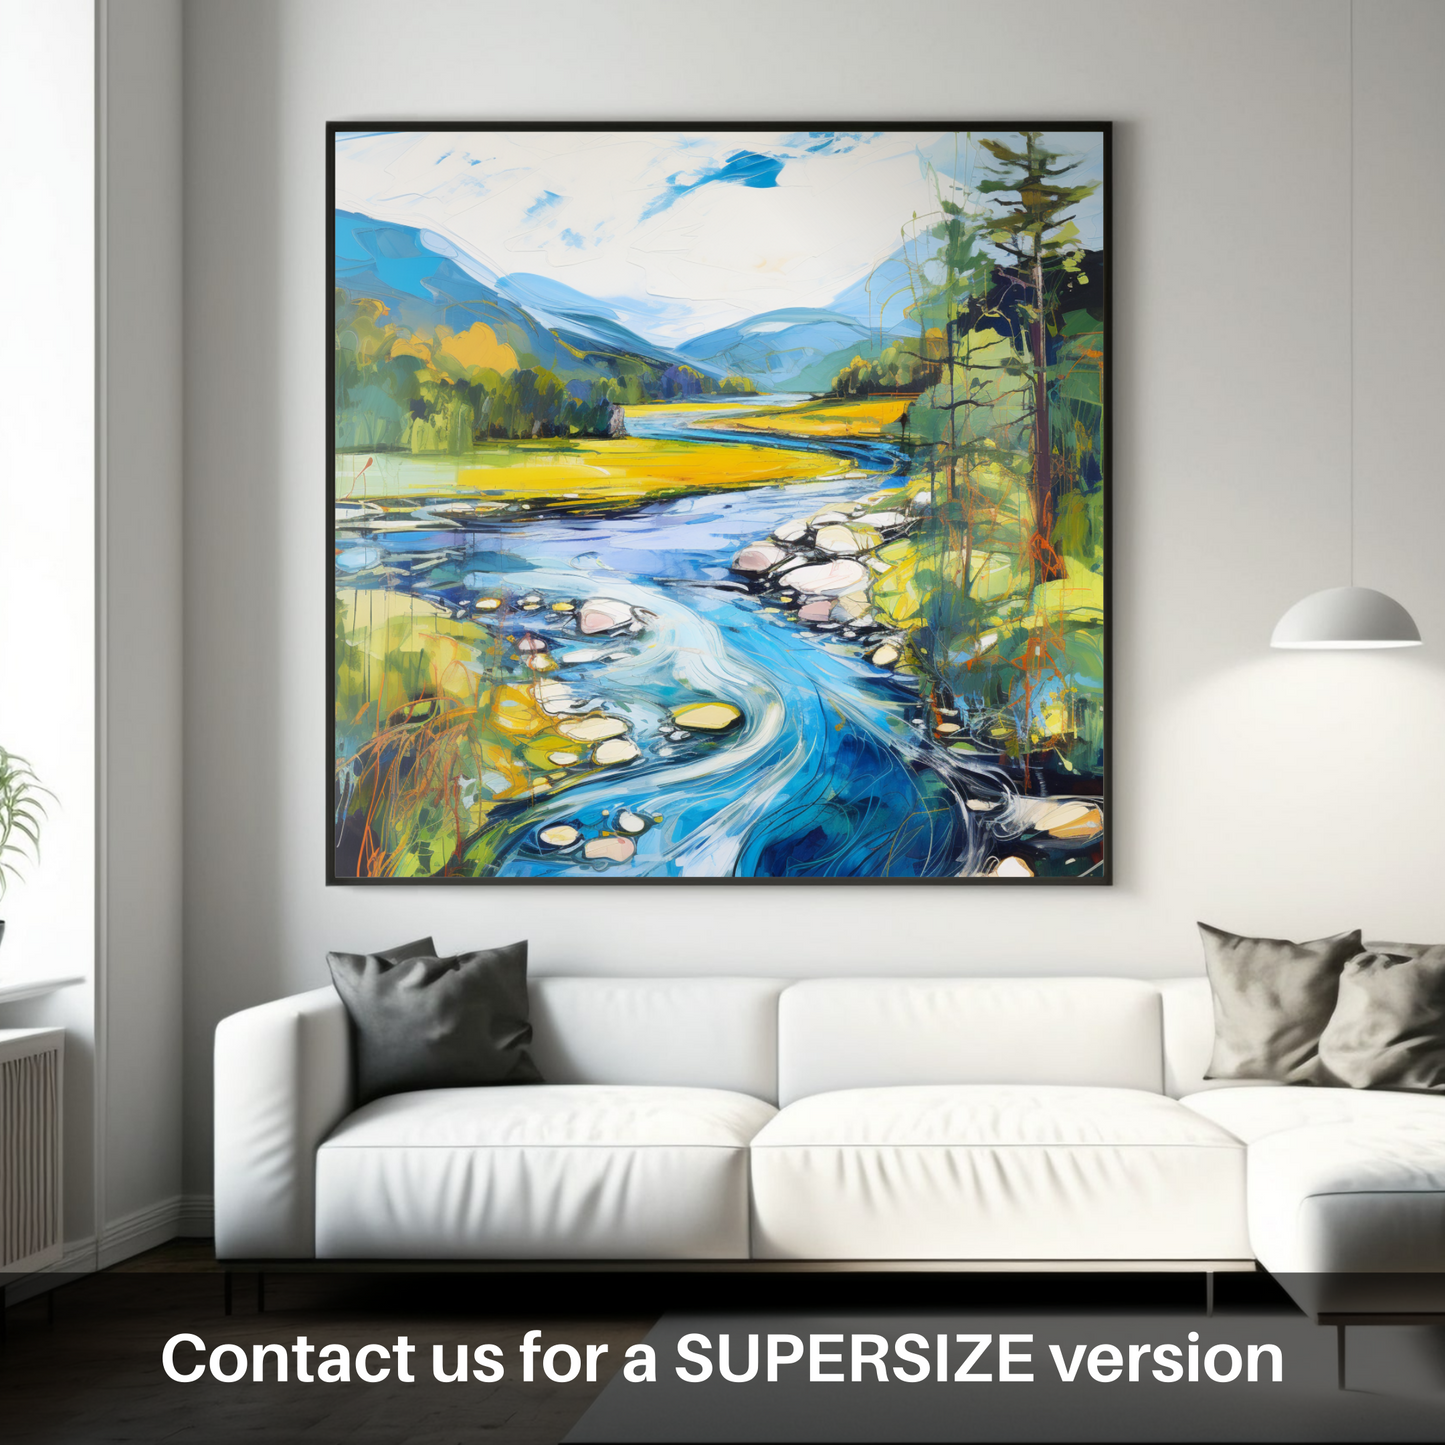 Huge supersize print of River Orchy, Argyll and Bute in summer